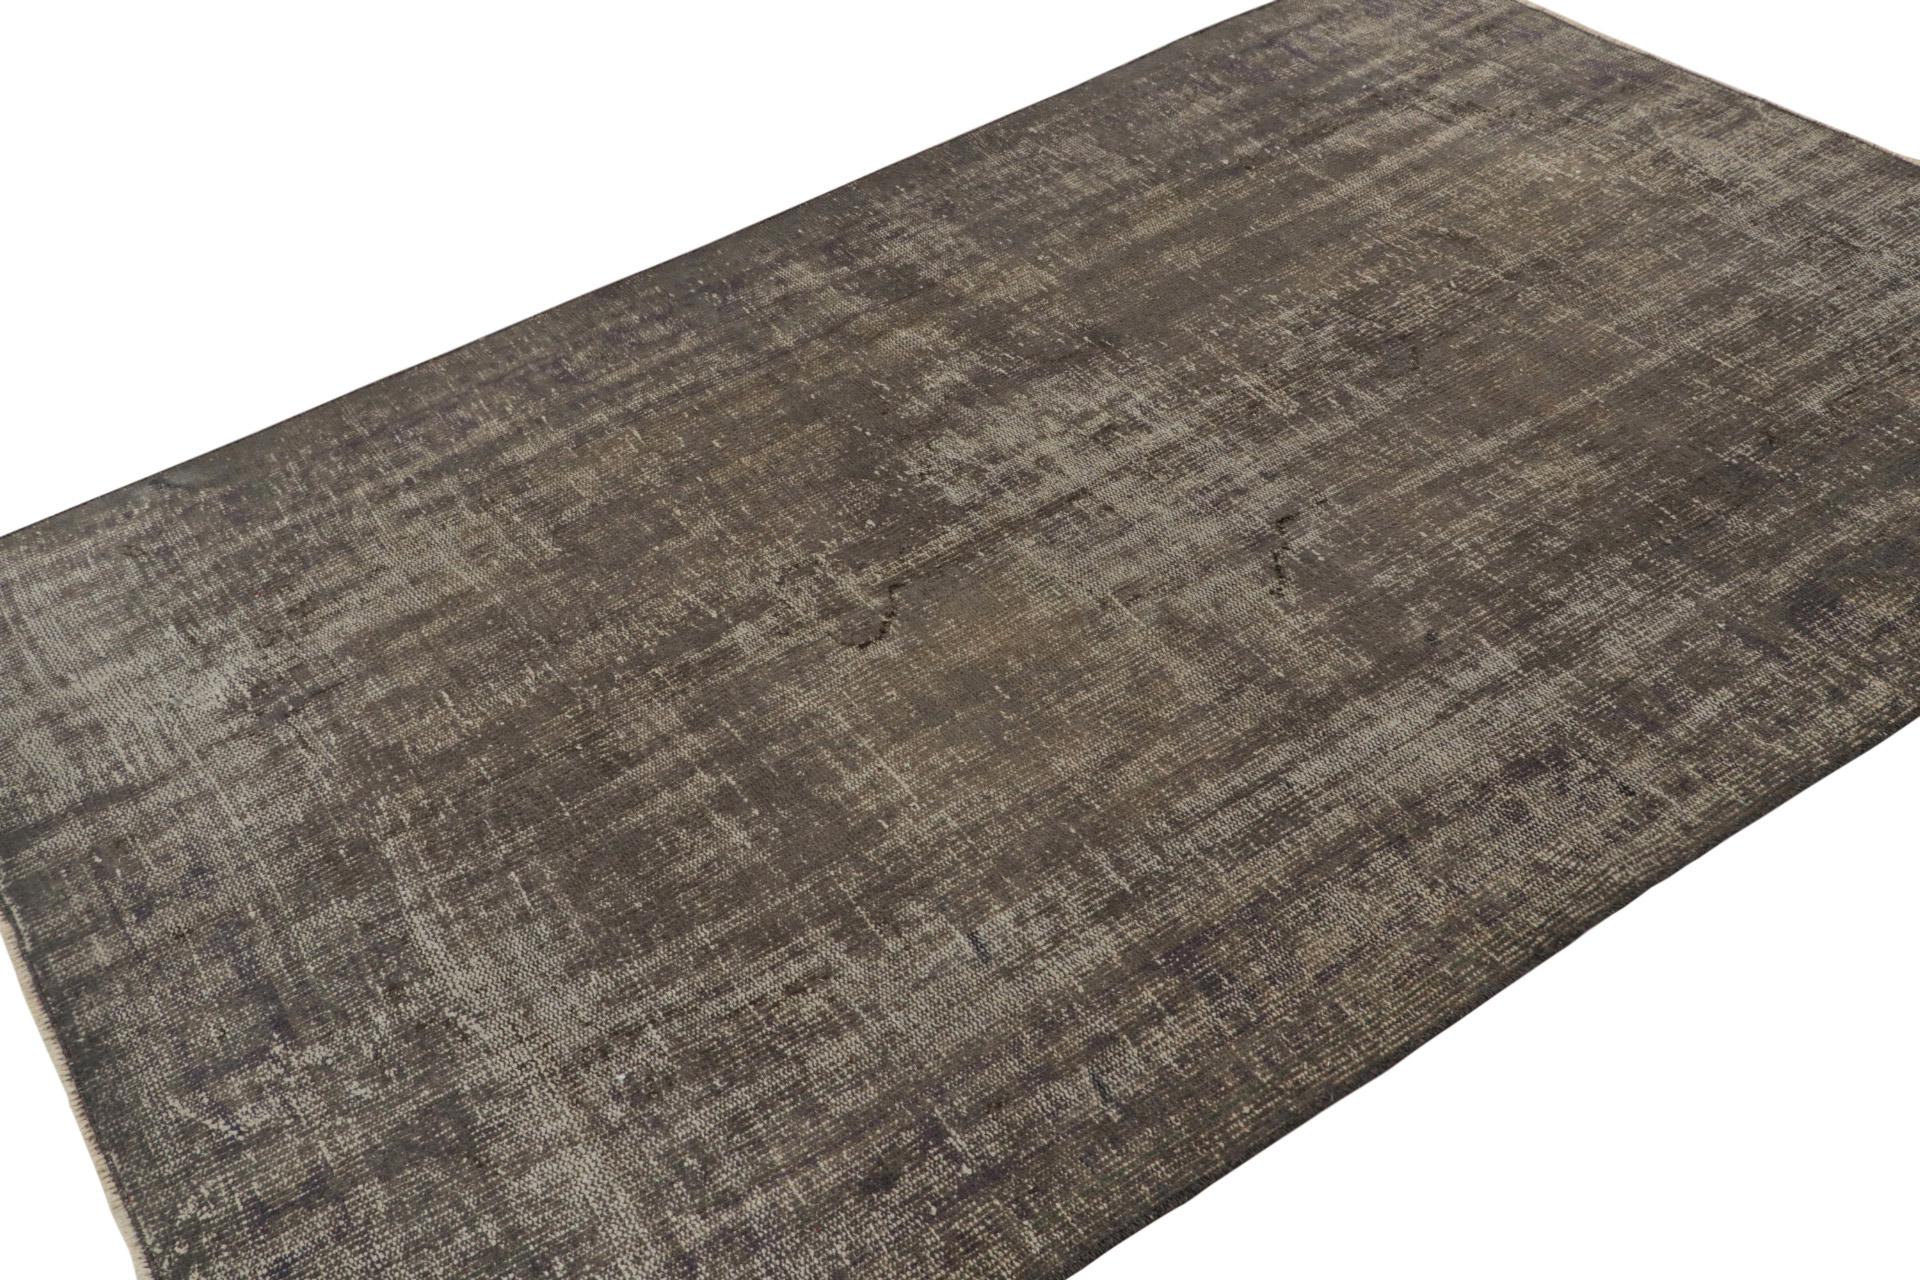 This vintage 5x8 rug, hand-knotted in wool, circa 1960-1970, is one of Zeki Müren’s rare pieces in ‘solid’ silver/gray tones with beige accents, features a muted look of pattern born of the weaving technique—subtle yet fabulous. 

On the Design: